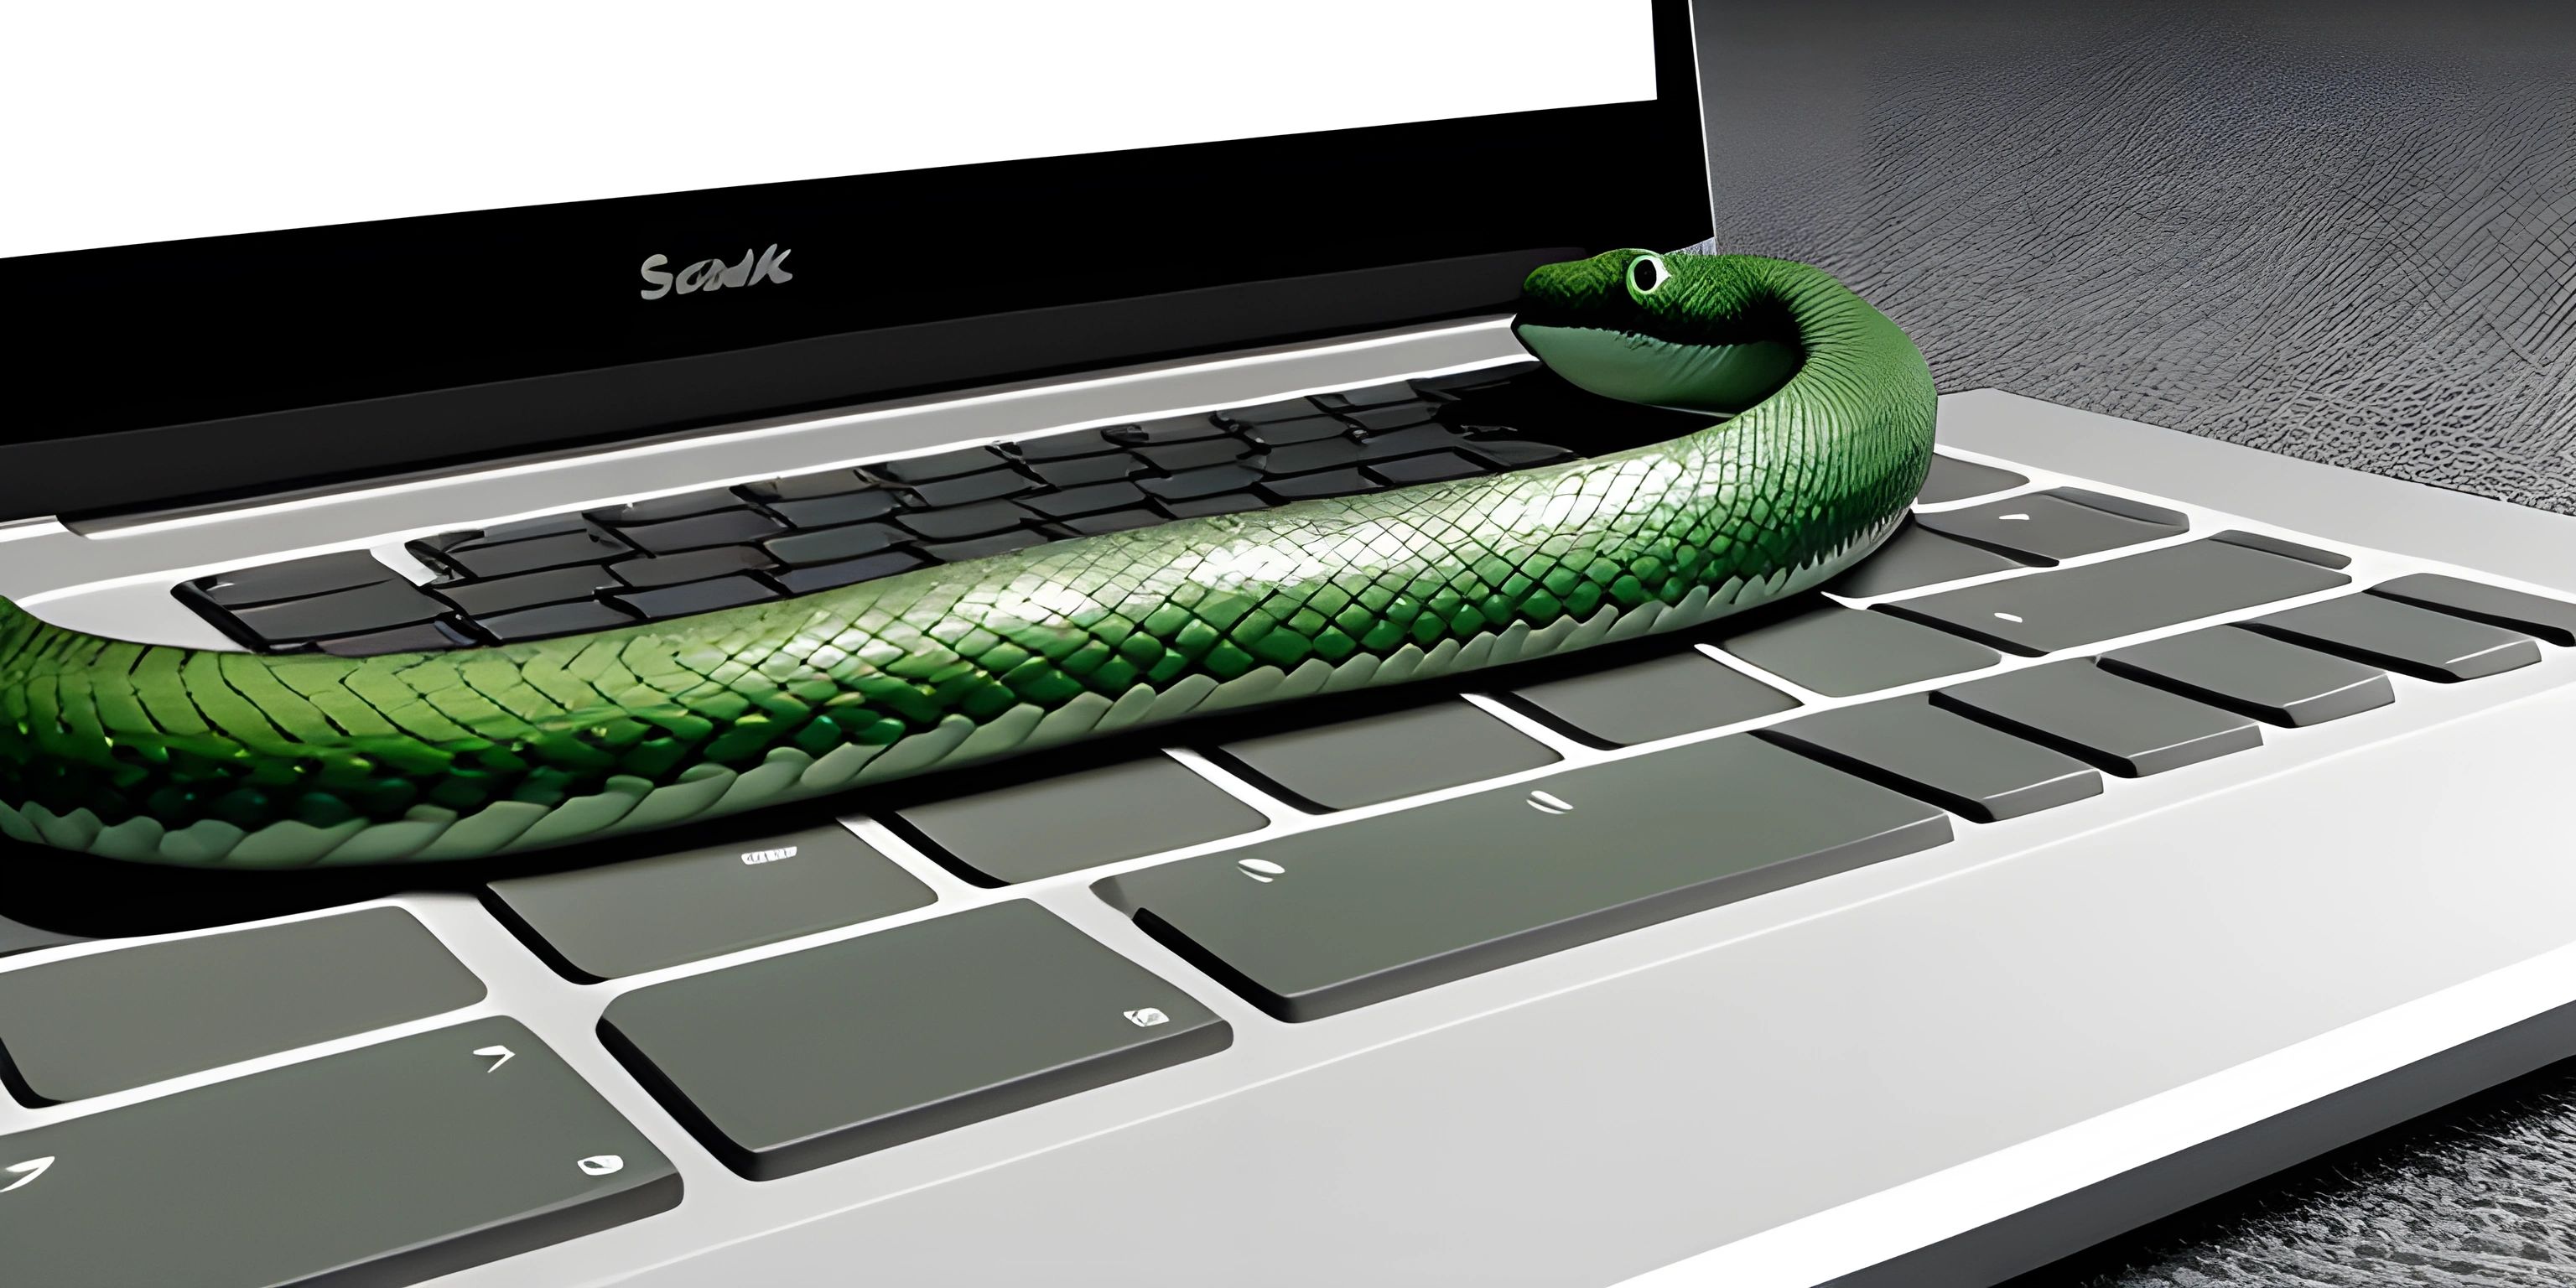 a green dragon sitting on the keyboard of a laptop computer that is open with a keypad